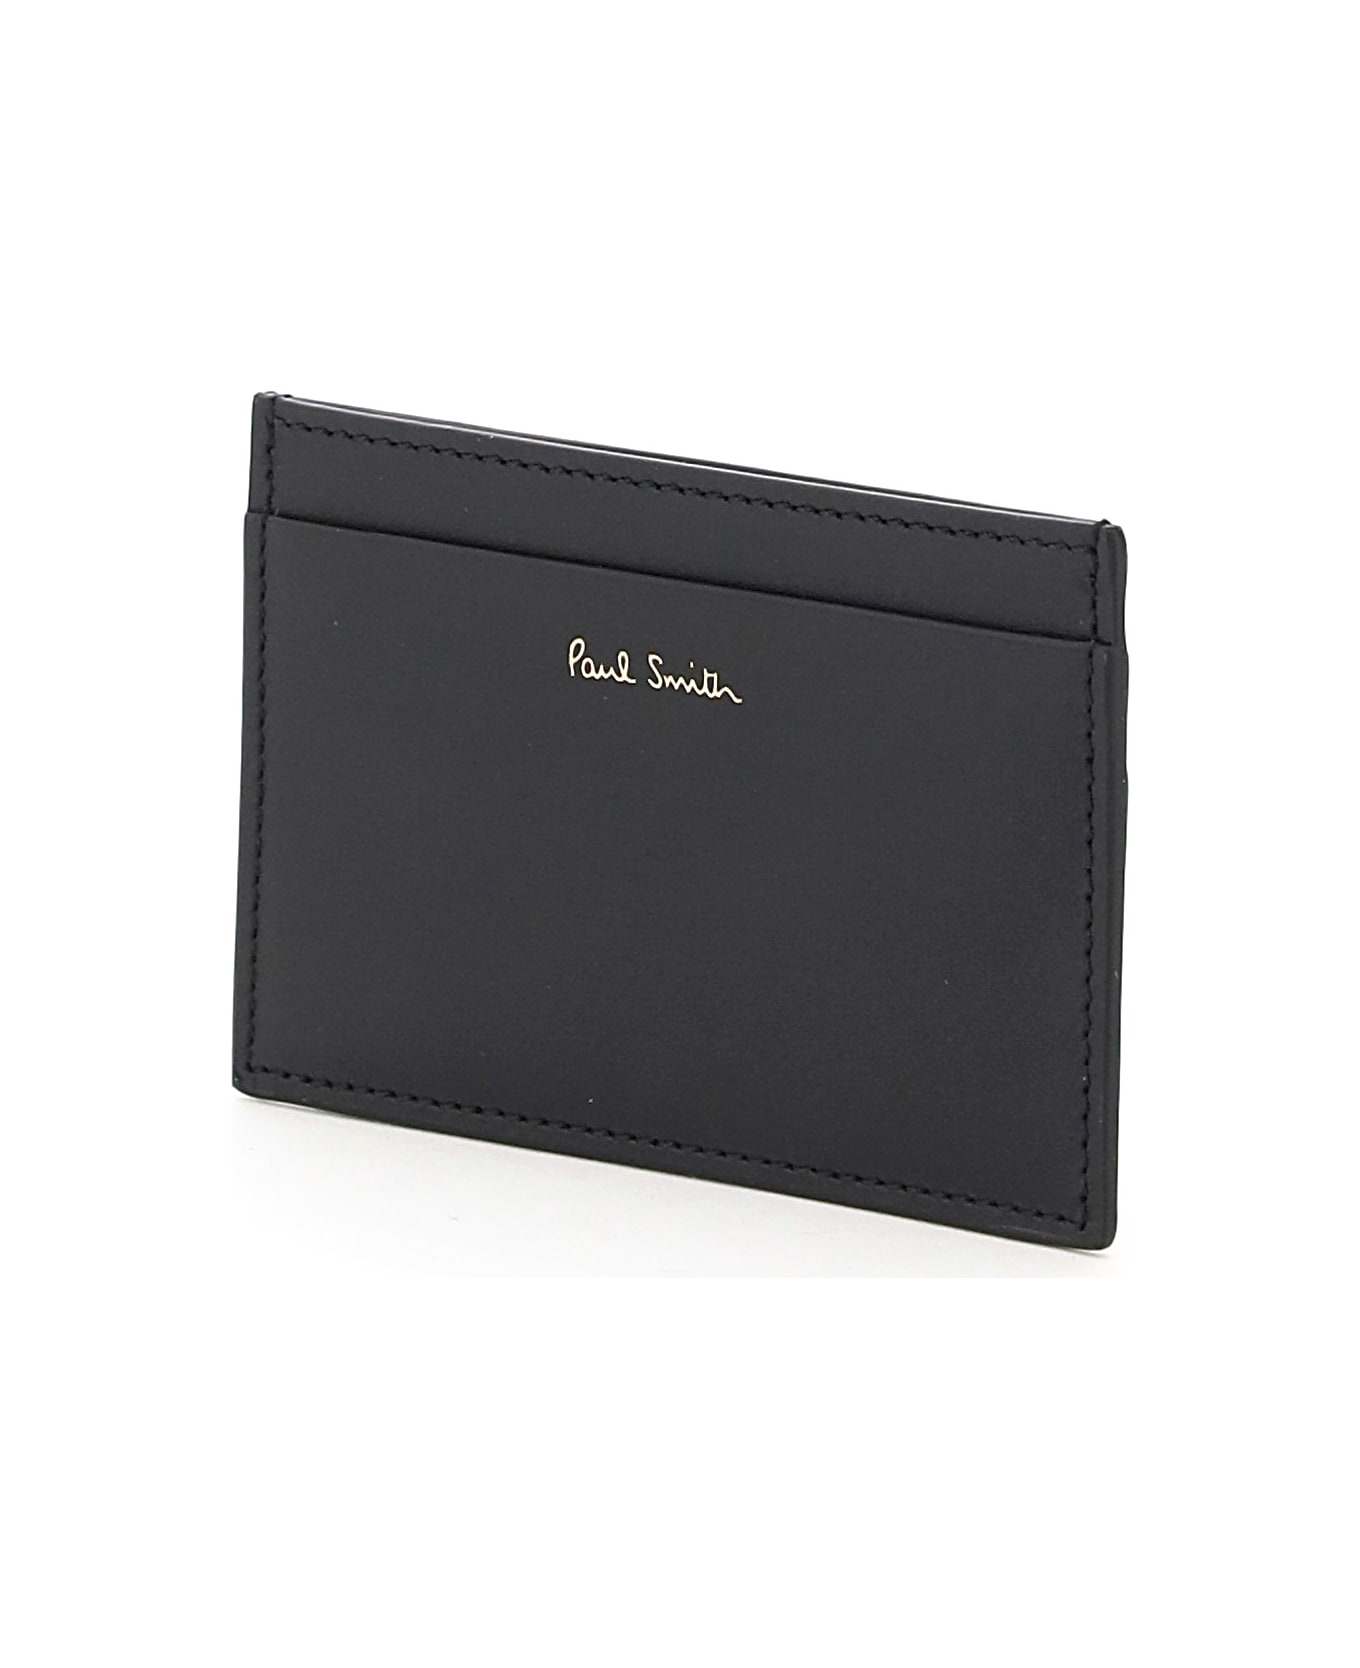 Paul Smith Striped Card Holder - BLACK/RED 財布